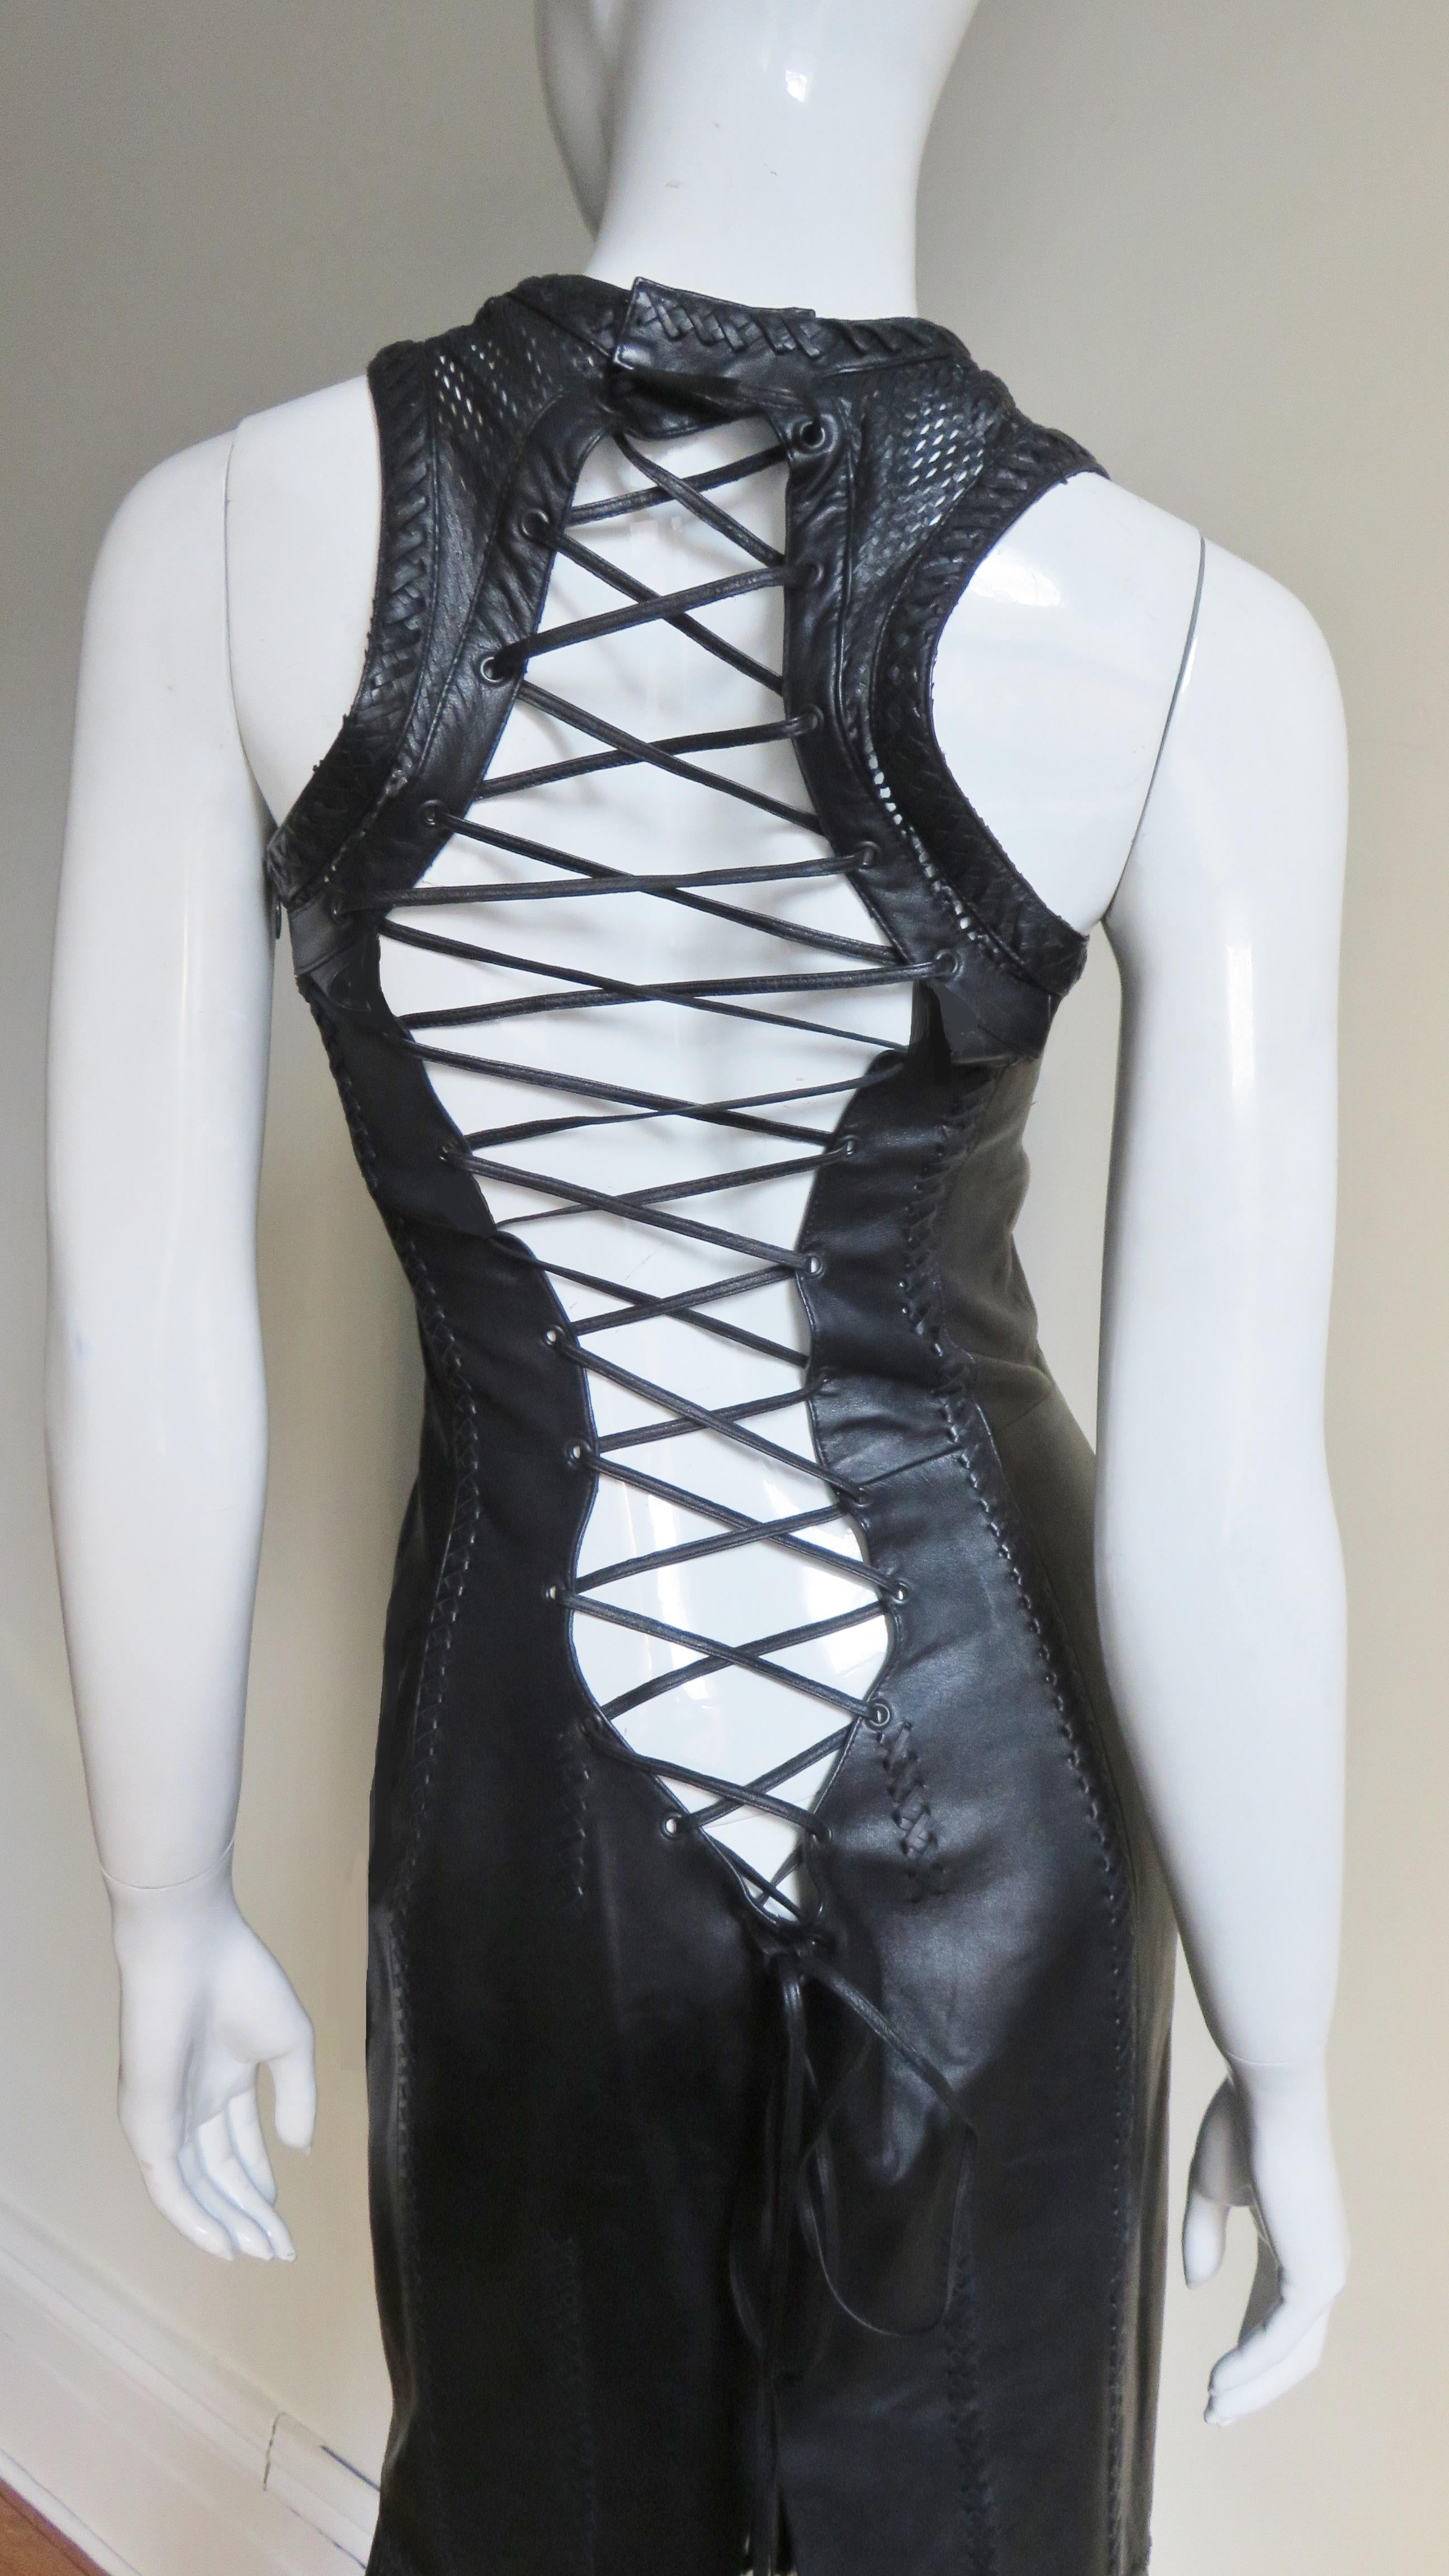  Gianni Versace Leather Lace up Dress S/S 2002 For Sale 7